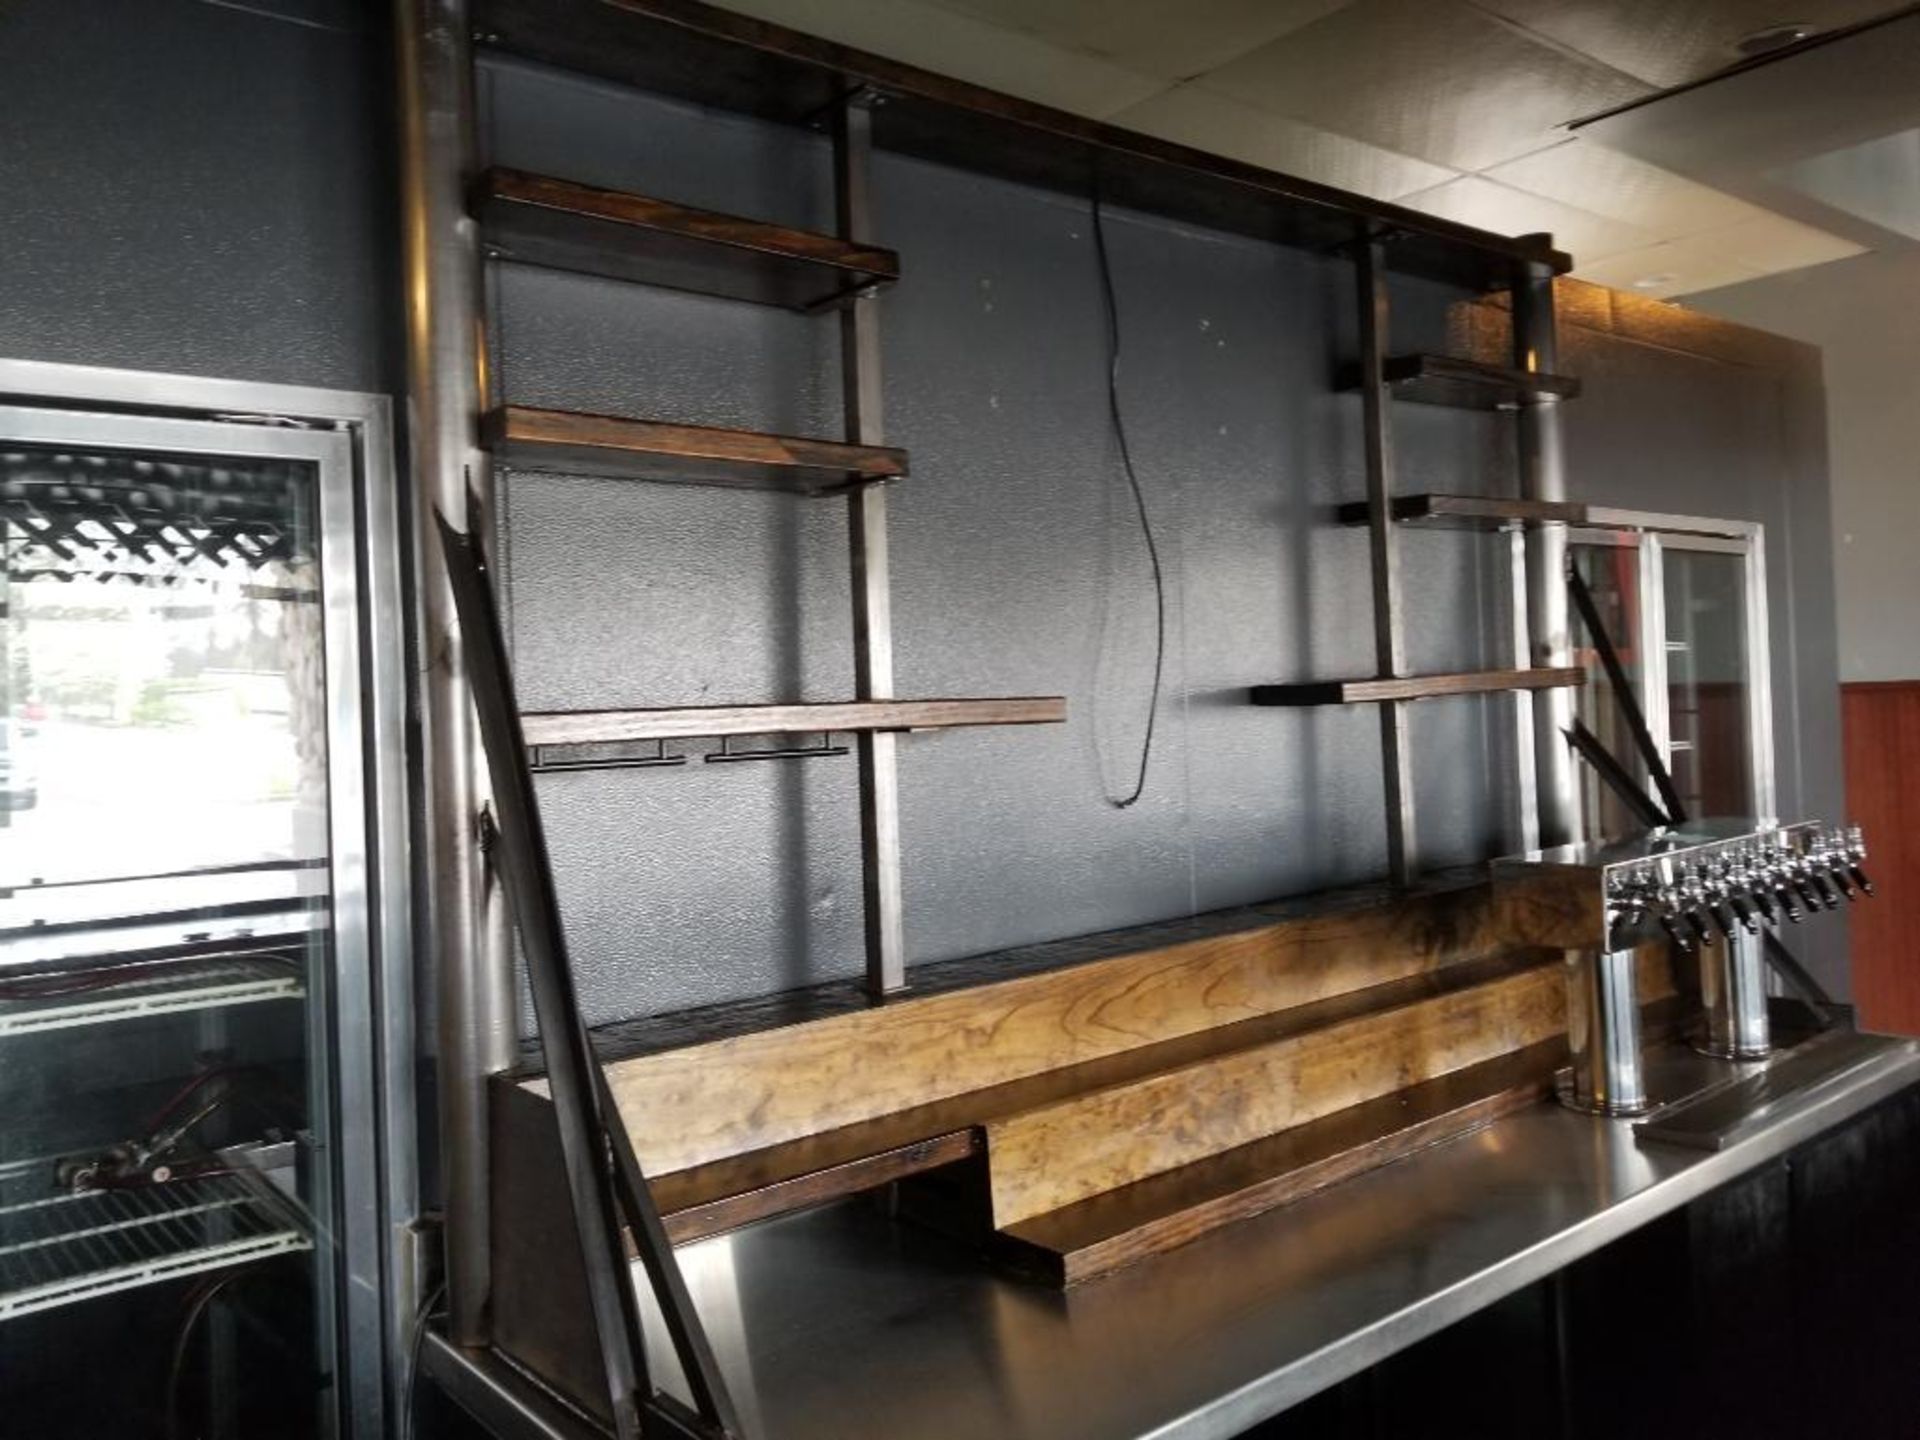 Back Bar and Cooler. 96" x 30' x 99" LxWxH. Tap is NOT included in this listing.